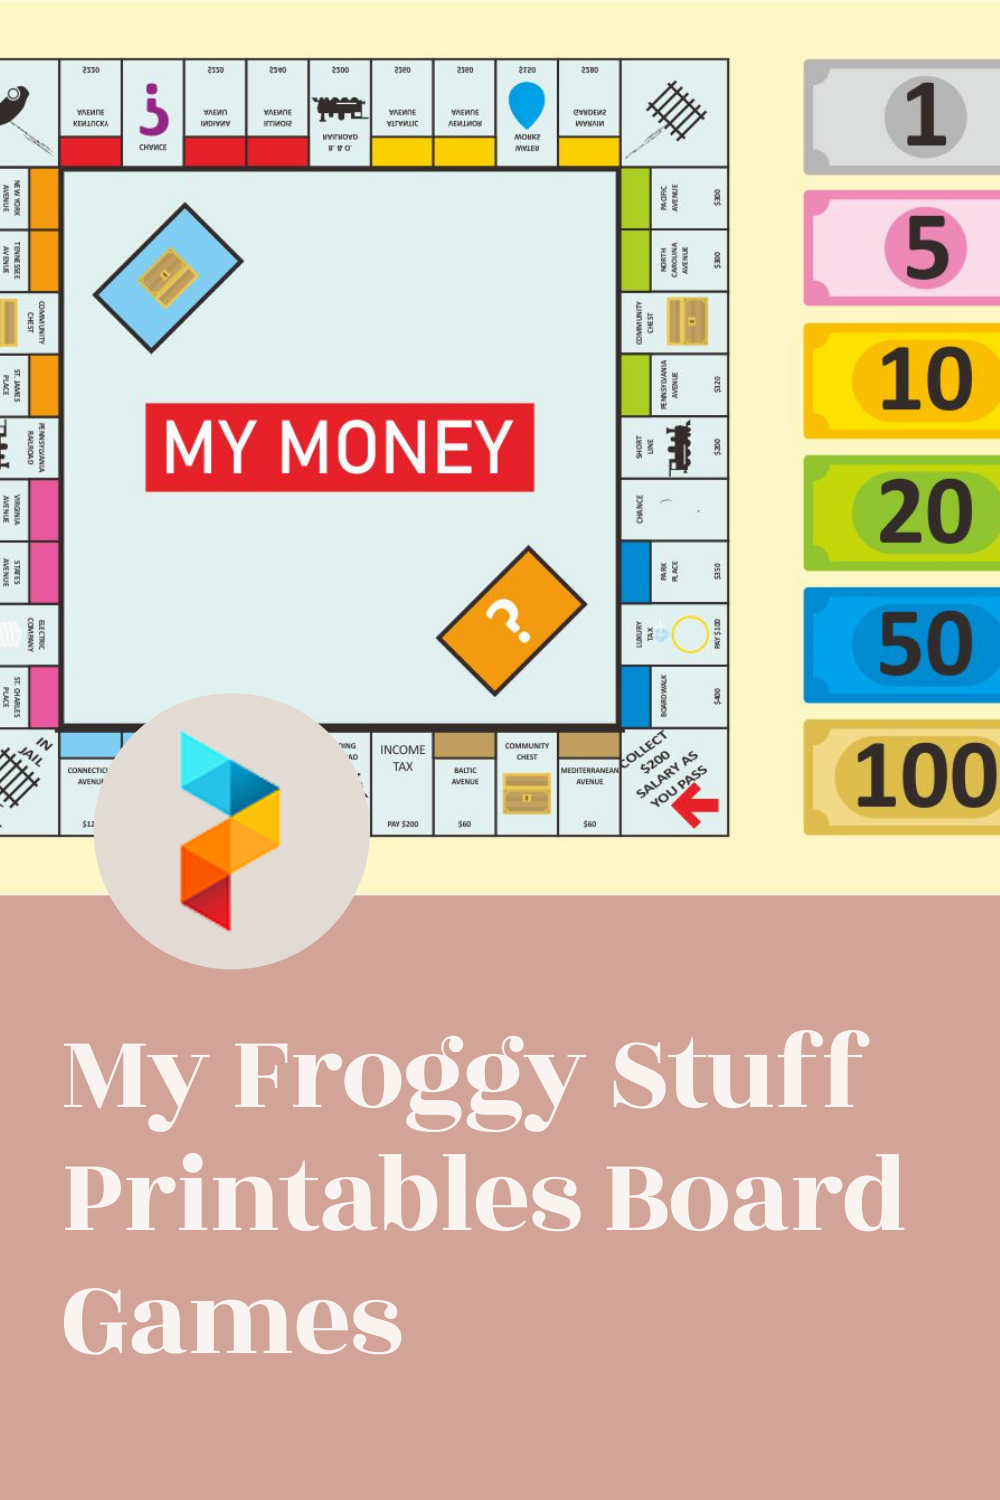 7 Best My Froggy Stuff Printables Board Games